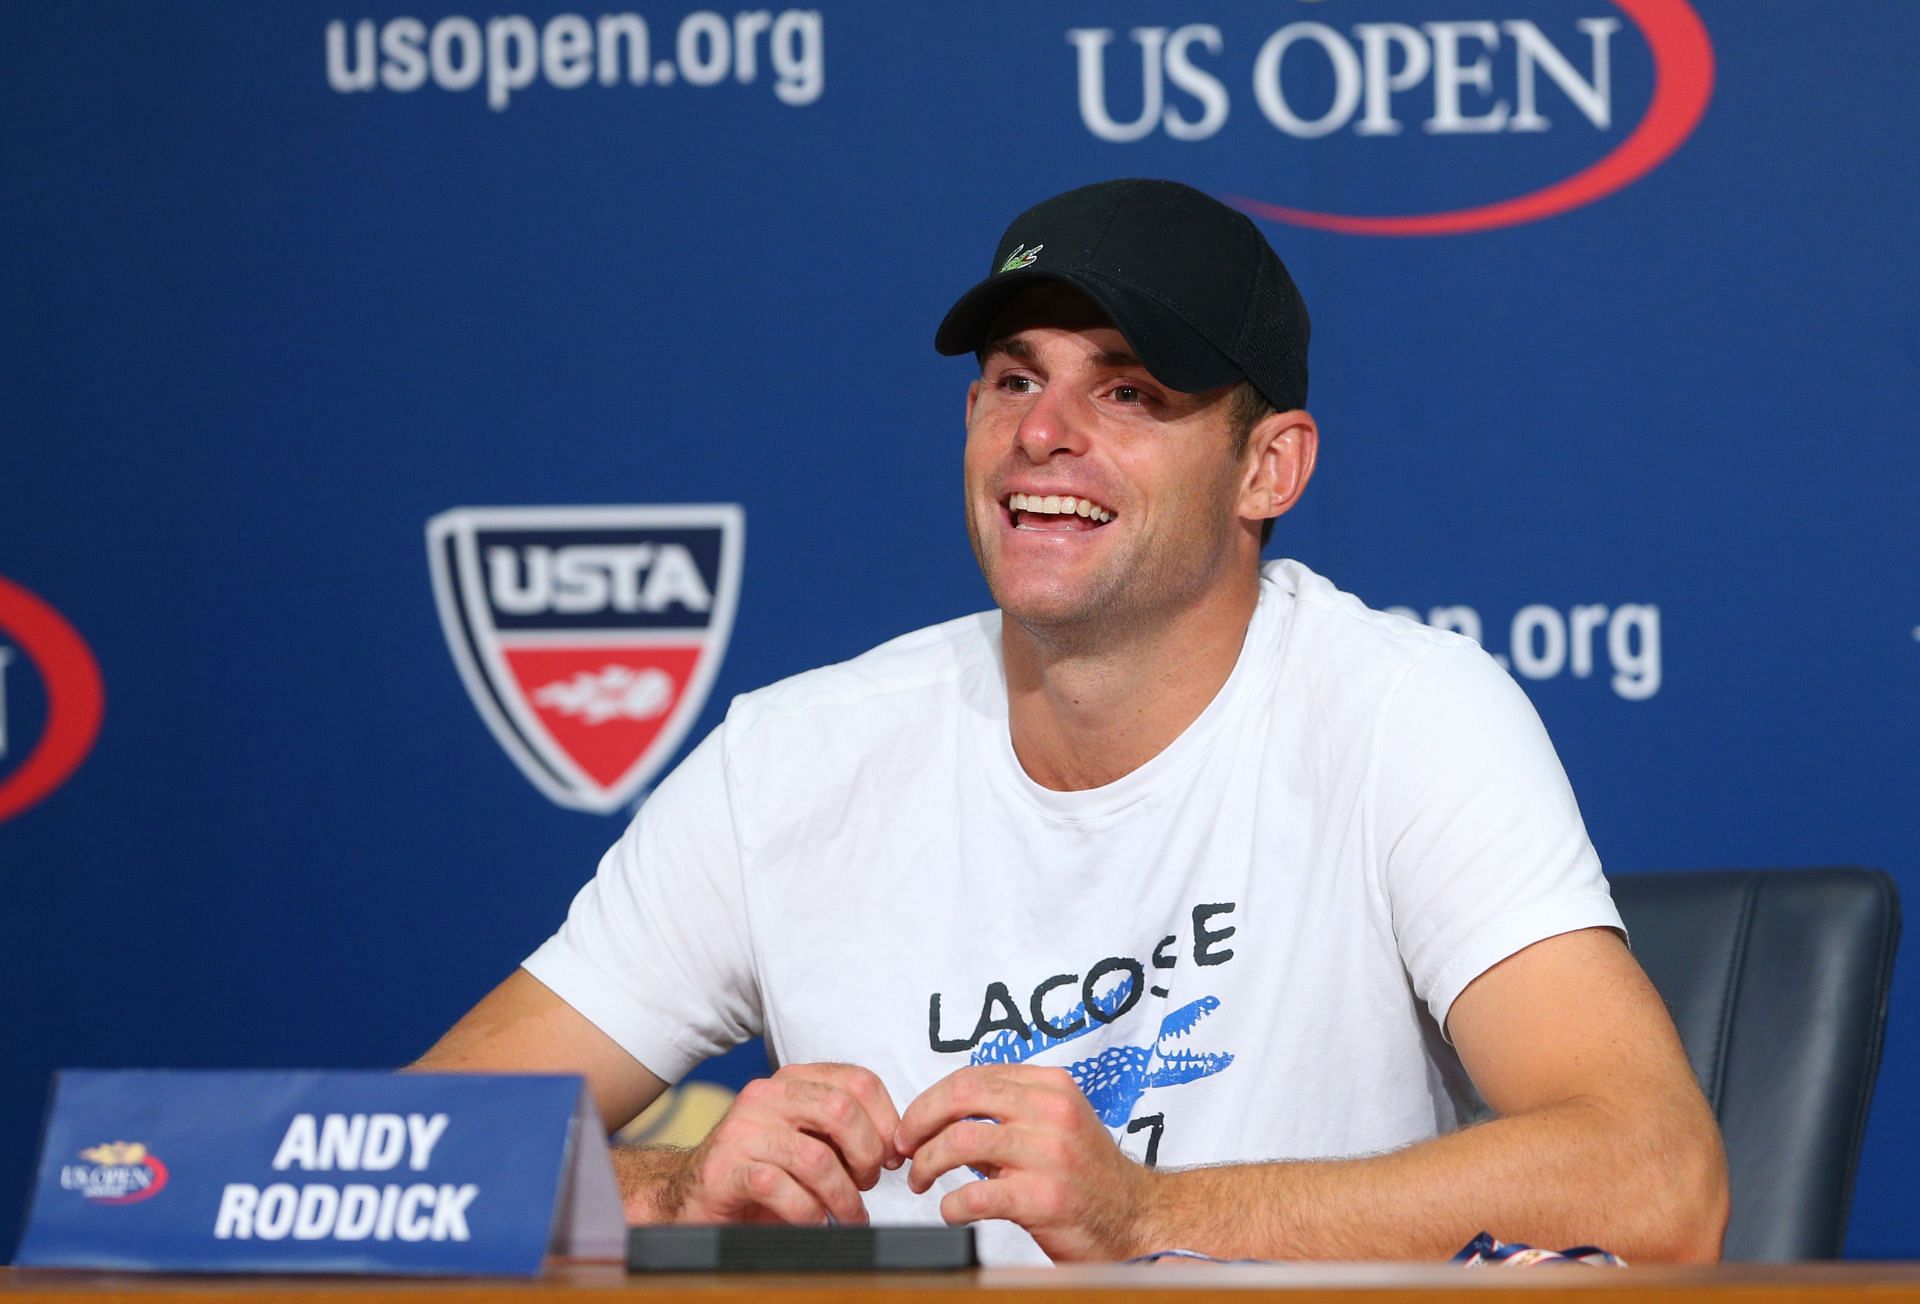 Andy Roddick pictured at the 2012 US Open